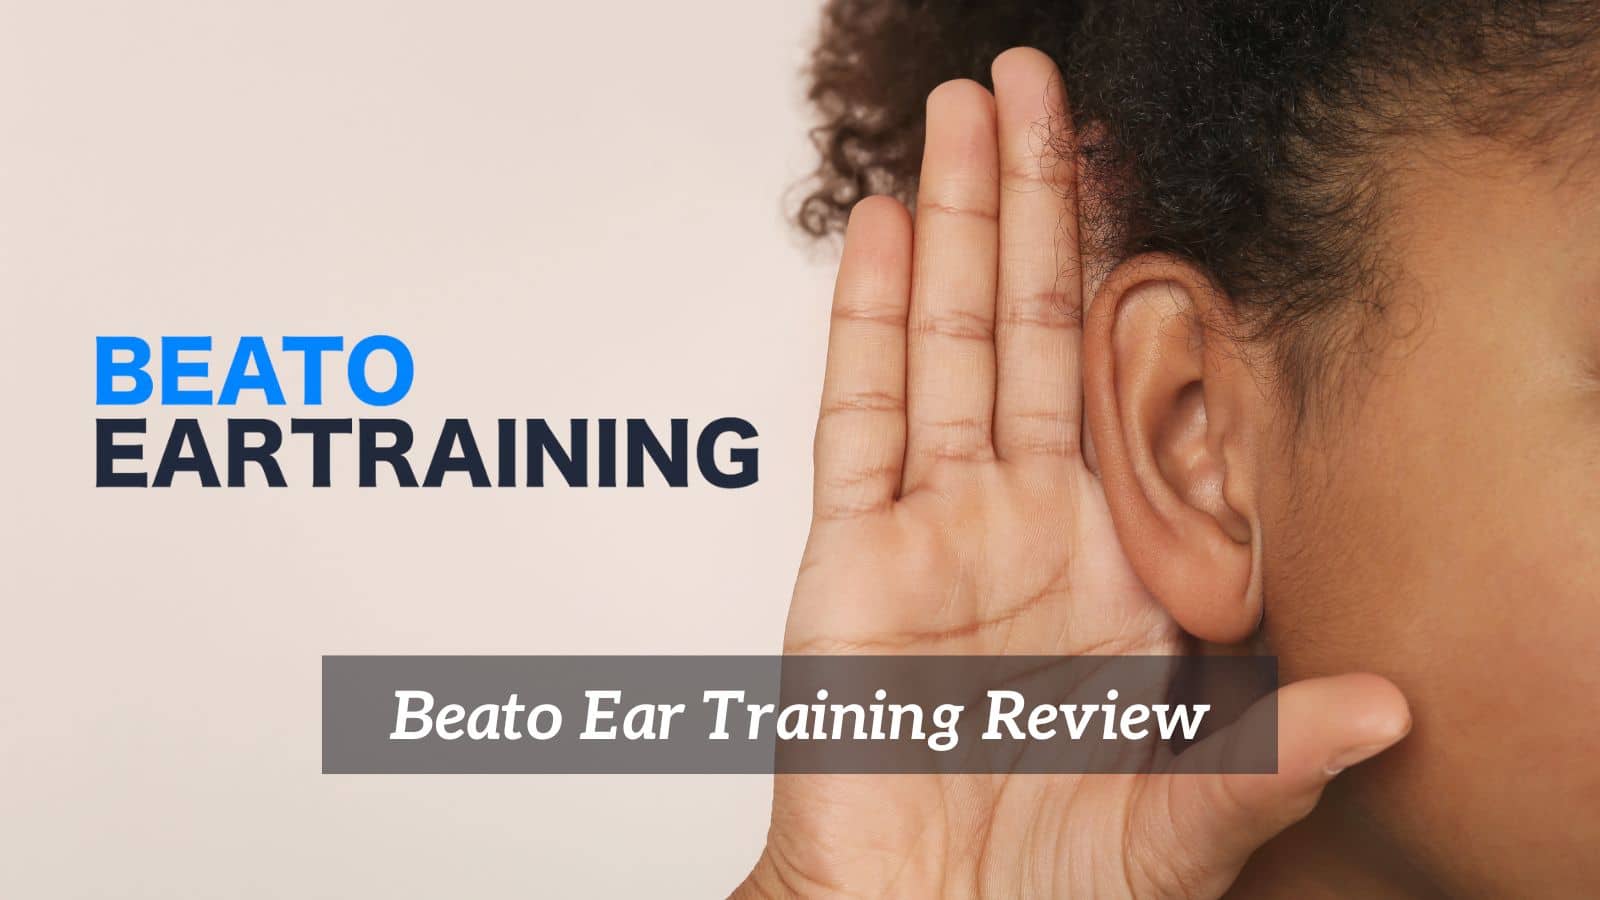 Beato Ear Training Review